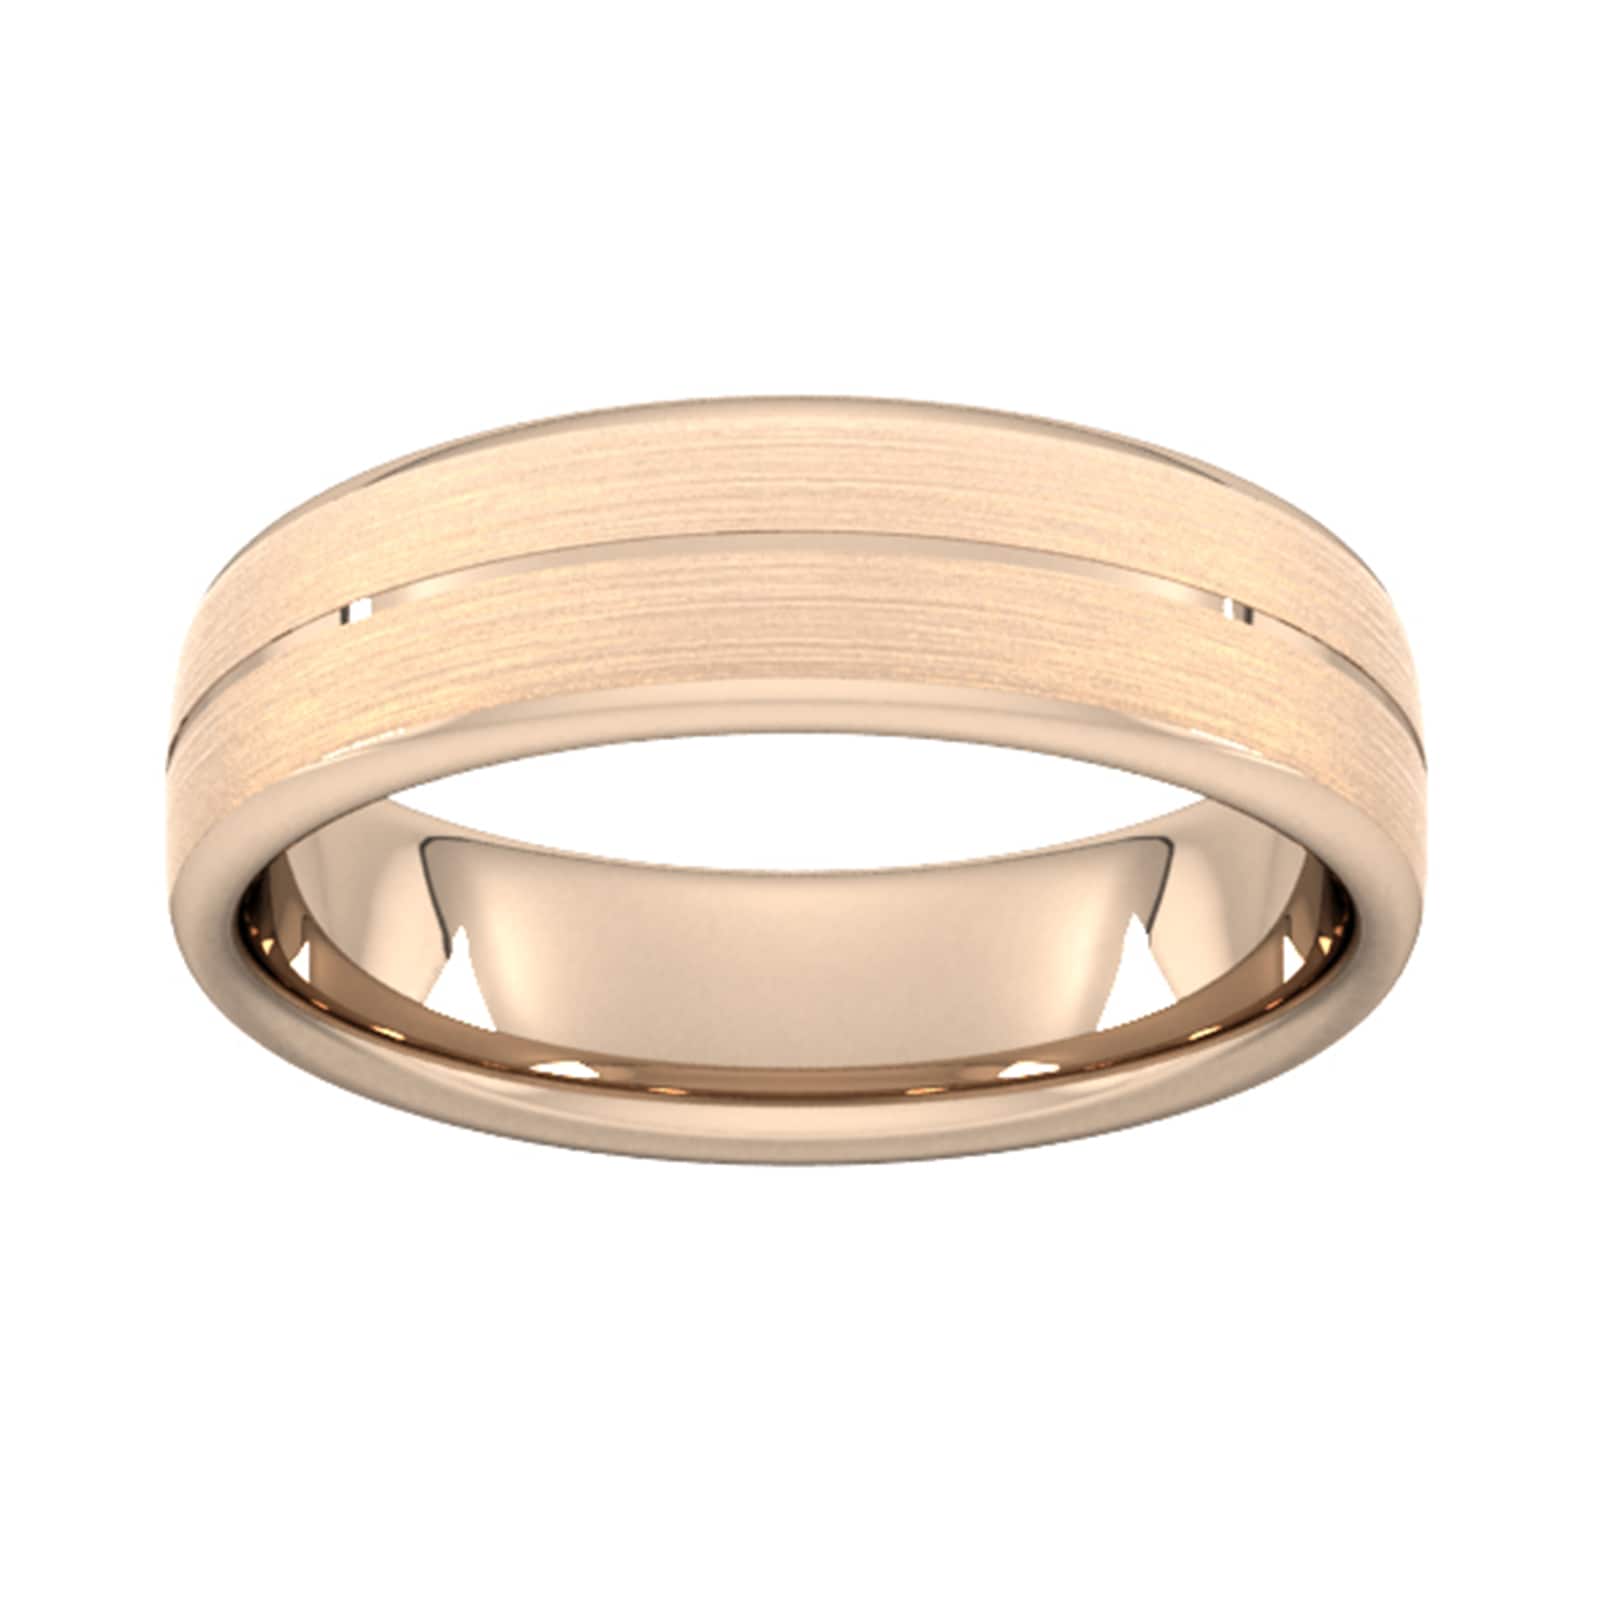 6mm Slight Court Heavy Centre Groove With Chamfered Edge Wedding Ring In 9 Carat Rose Gold - Ring Size S